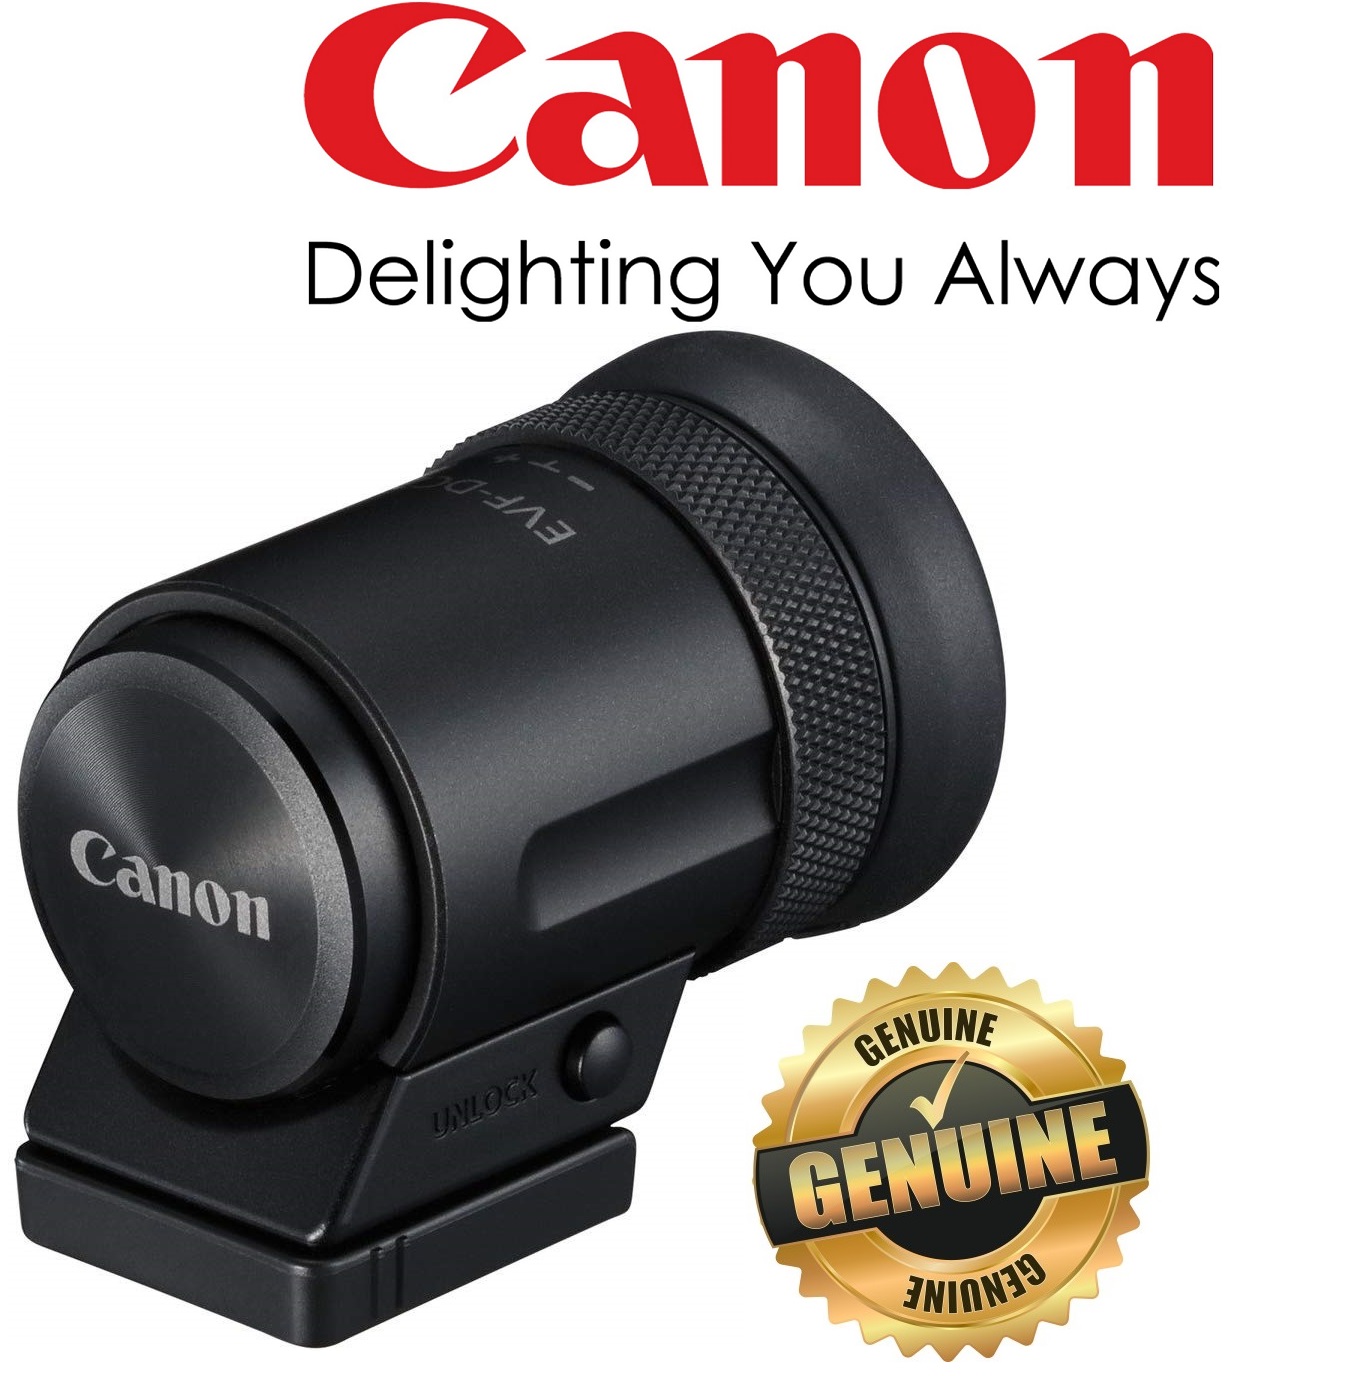 Canon EVF-DC2 Electronic Viewfinder (Black)